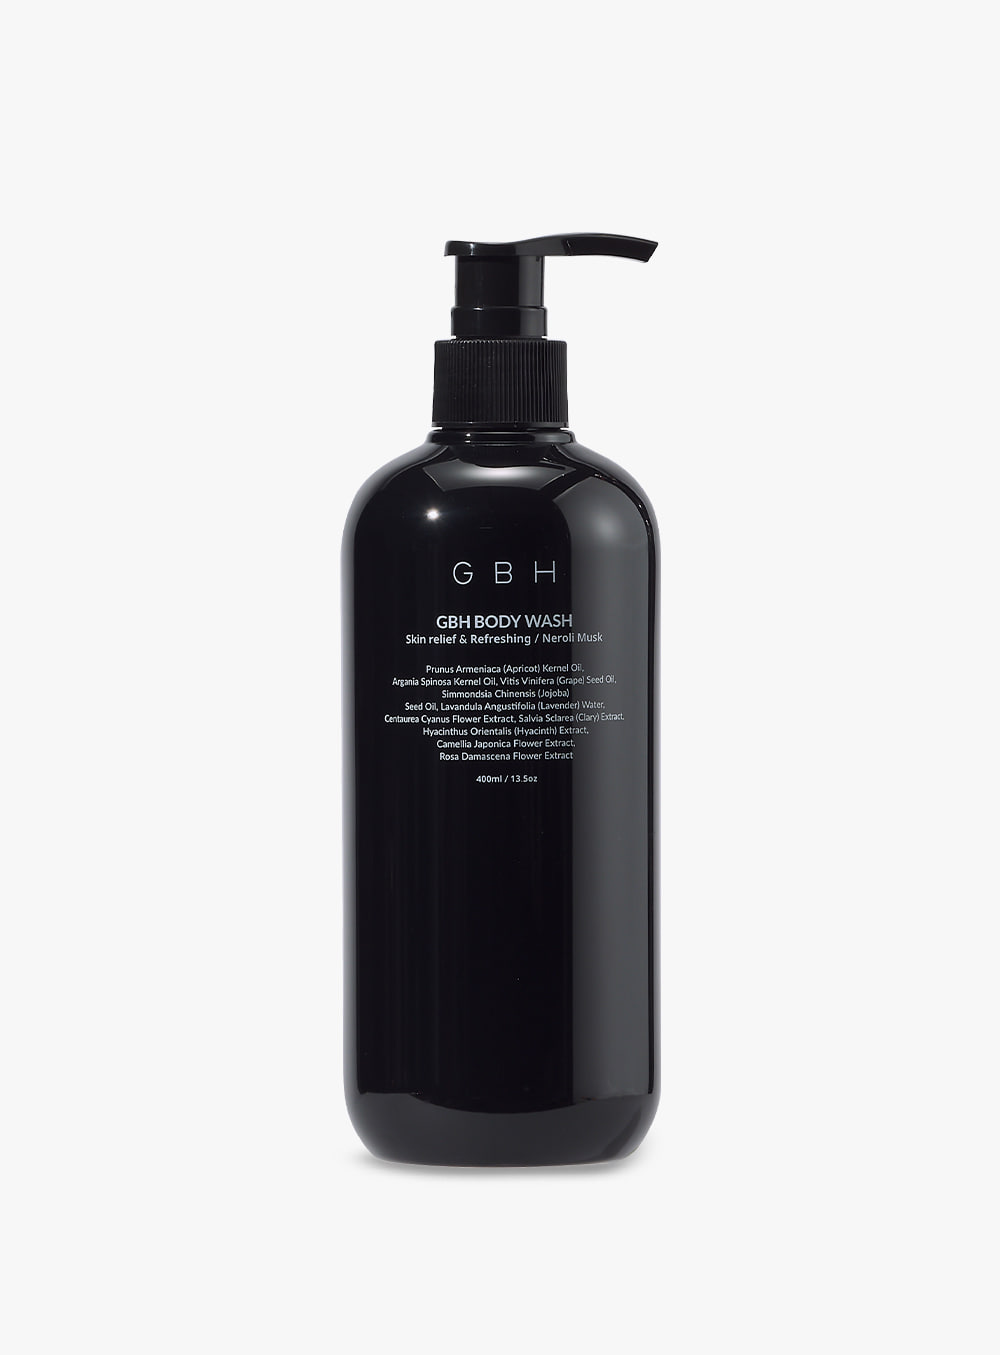 GBH - Body Wash Neroil Musk